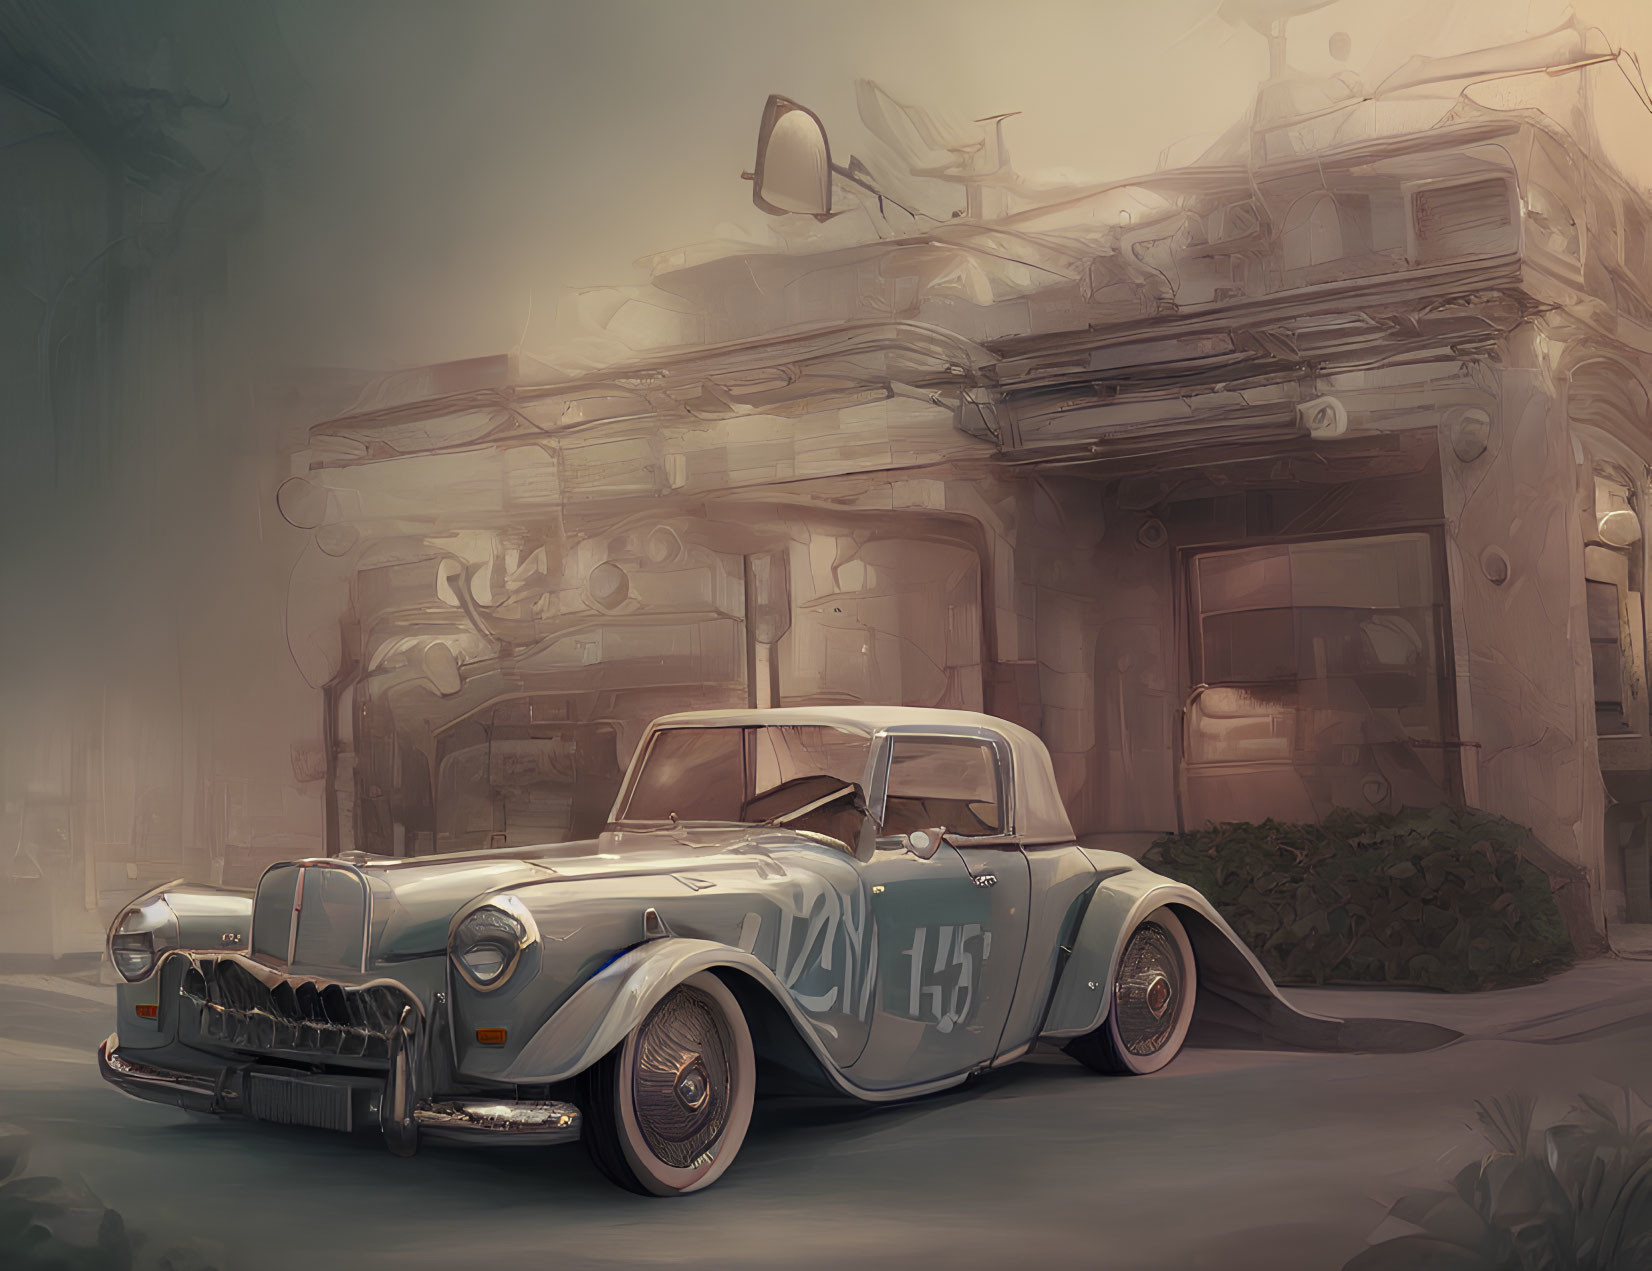 Vintage Car with Racing Numbers in Foggy Post-Apocalyptic Landscape